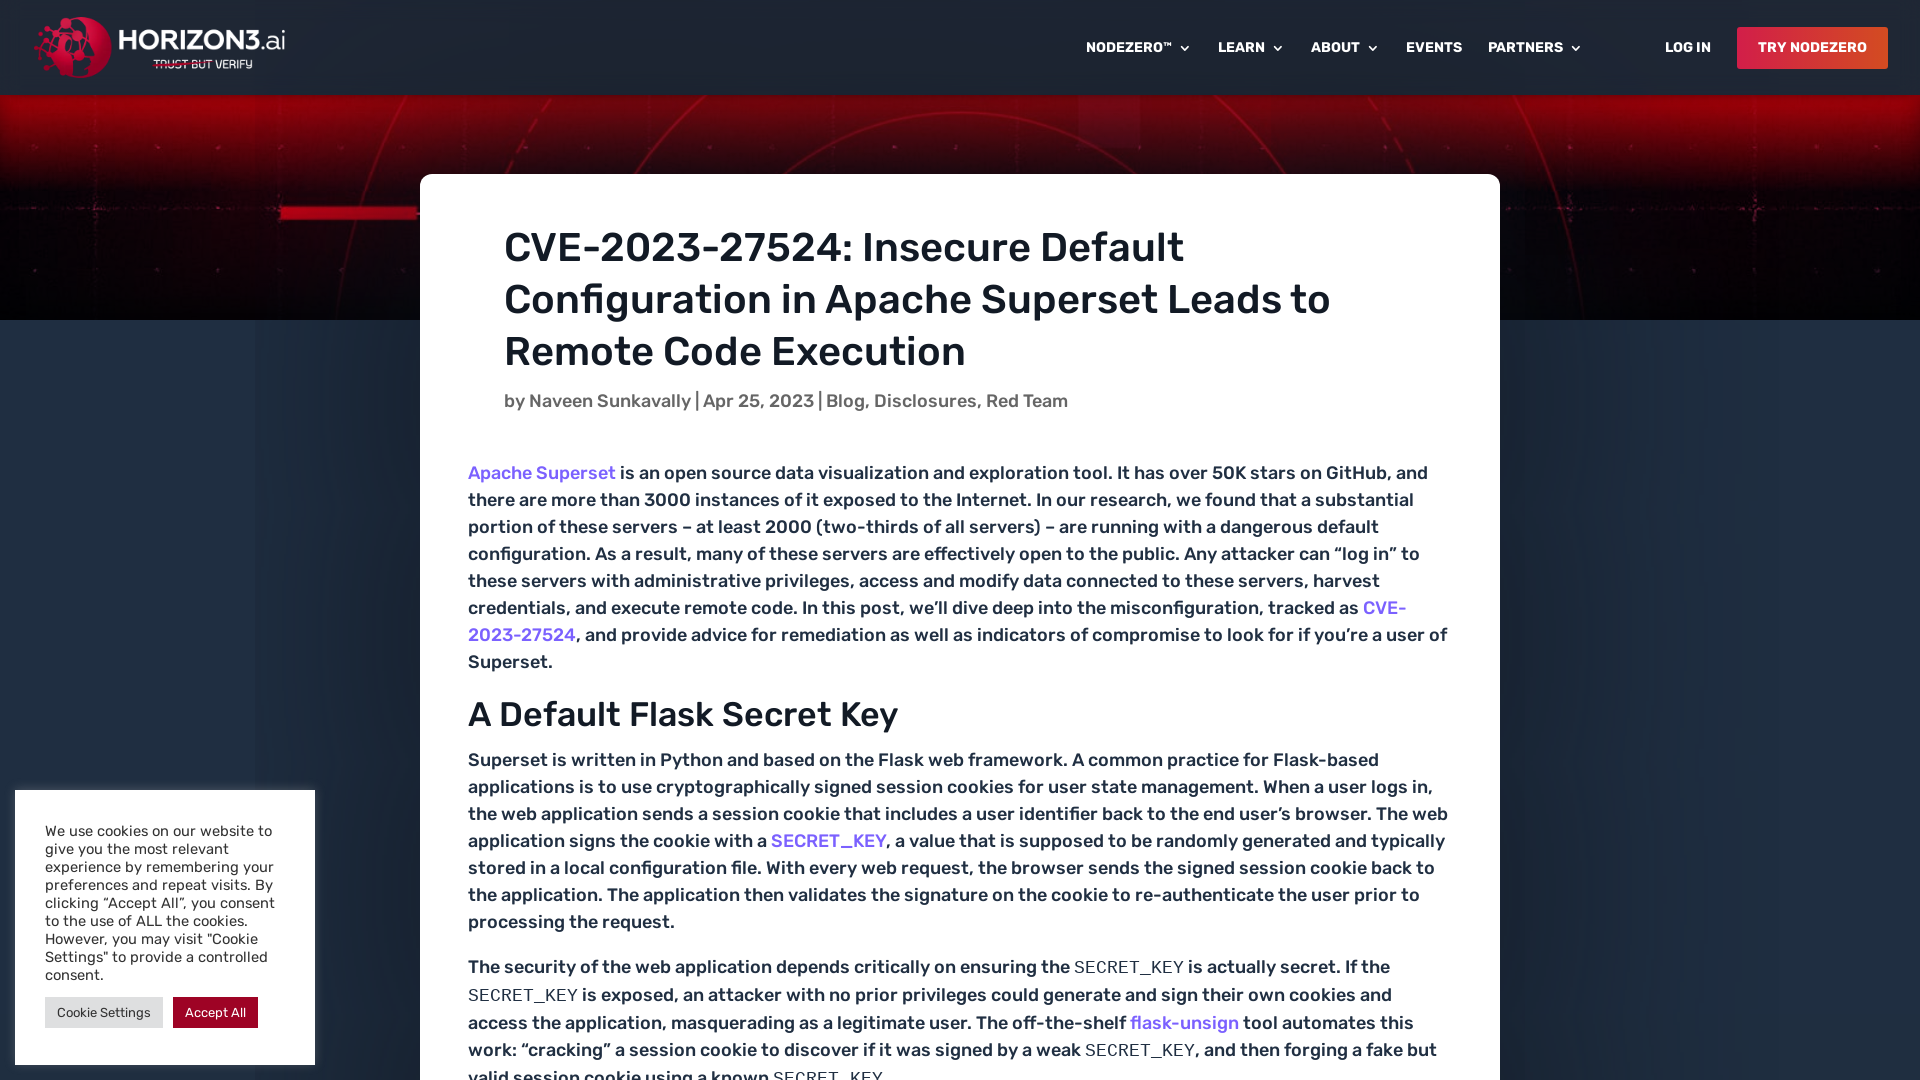 CVE-2023-27524: Insecure Default Configuration in Apache Superset Leads to Remote Code Execution – Horizon3.ai